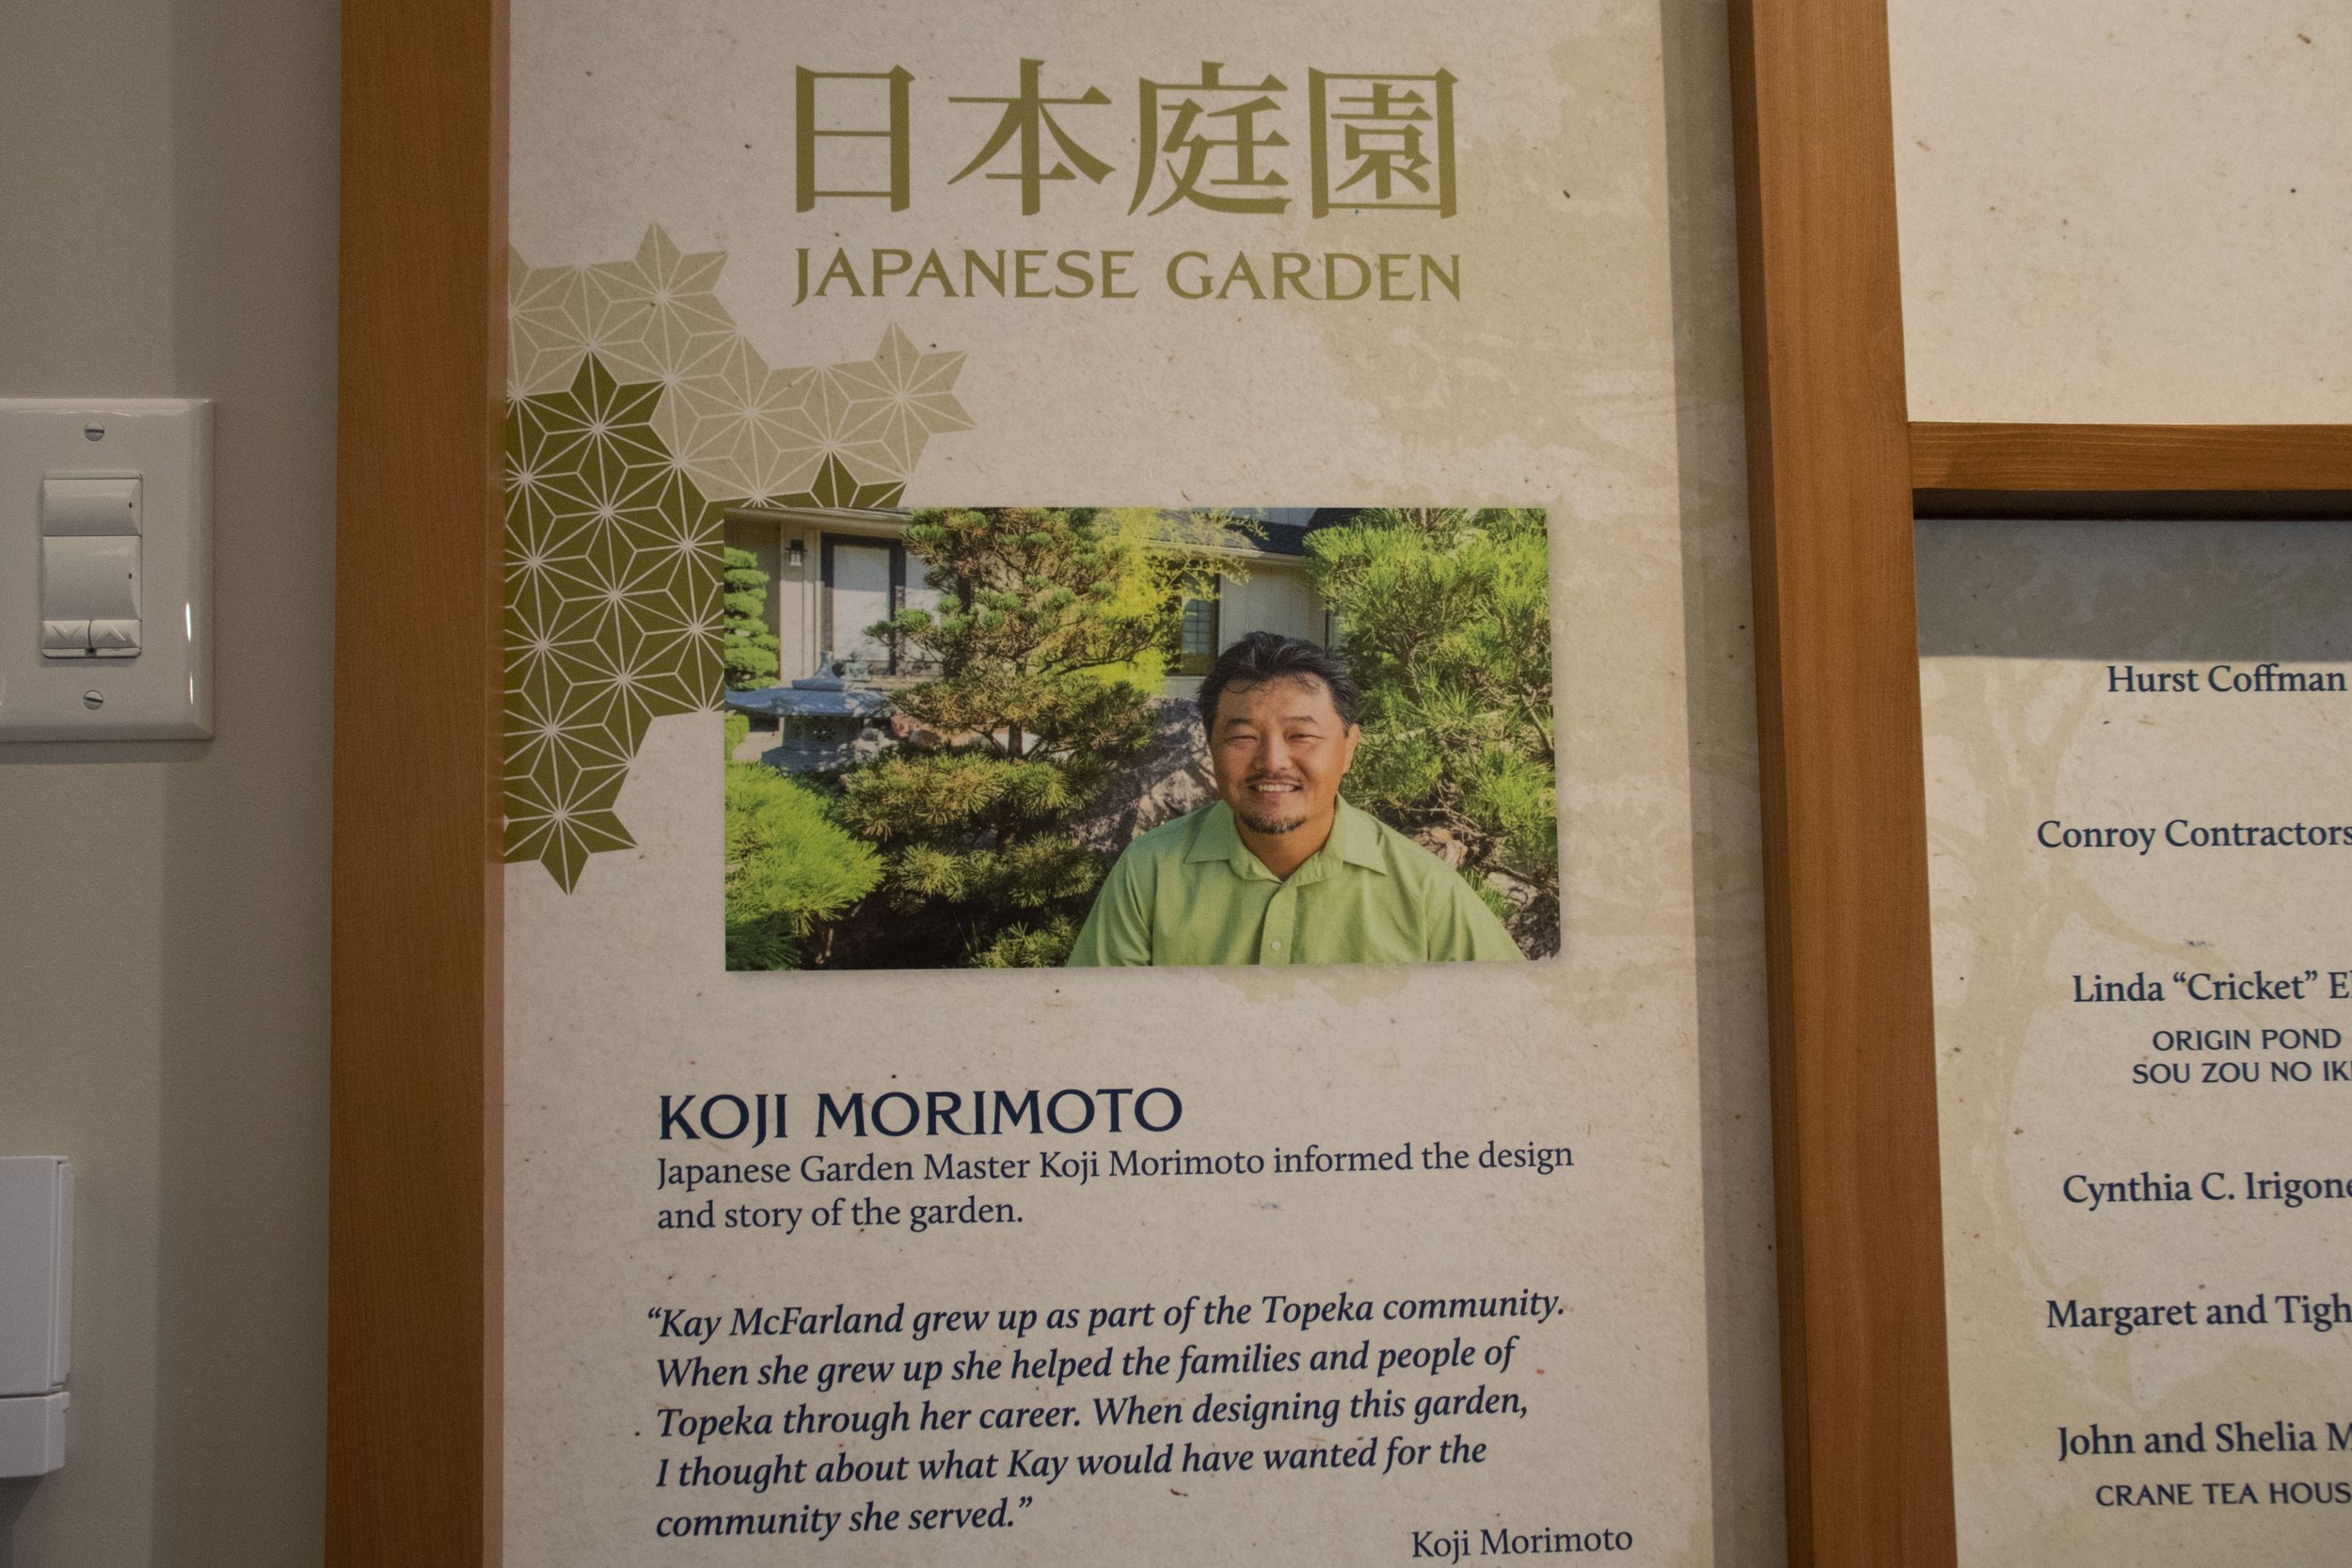 About Koji and the Garden